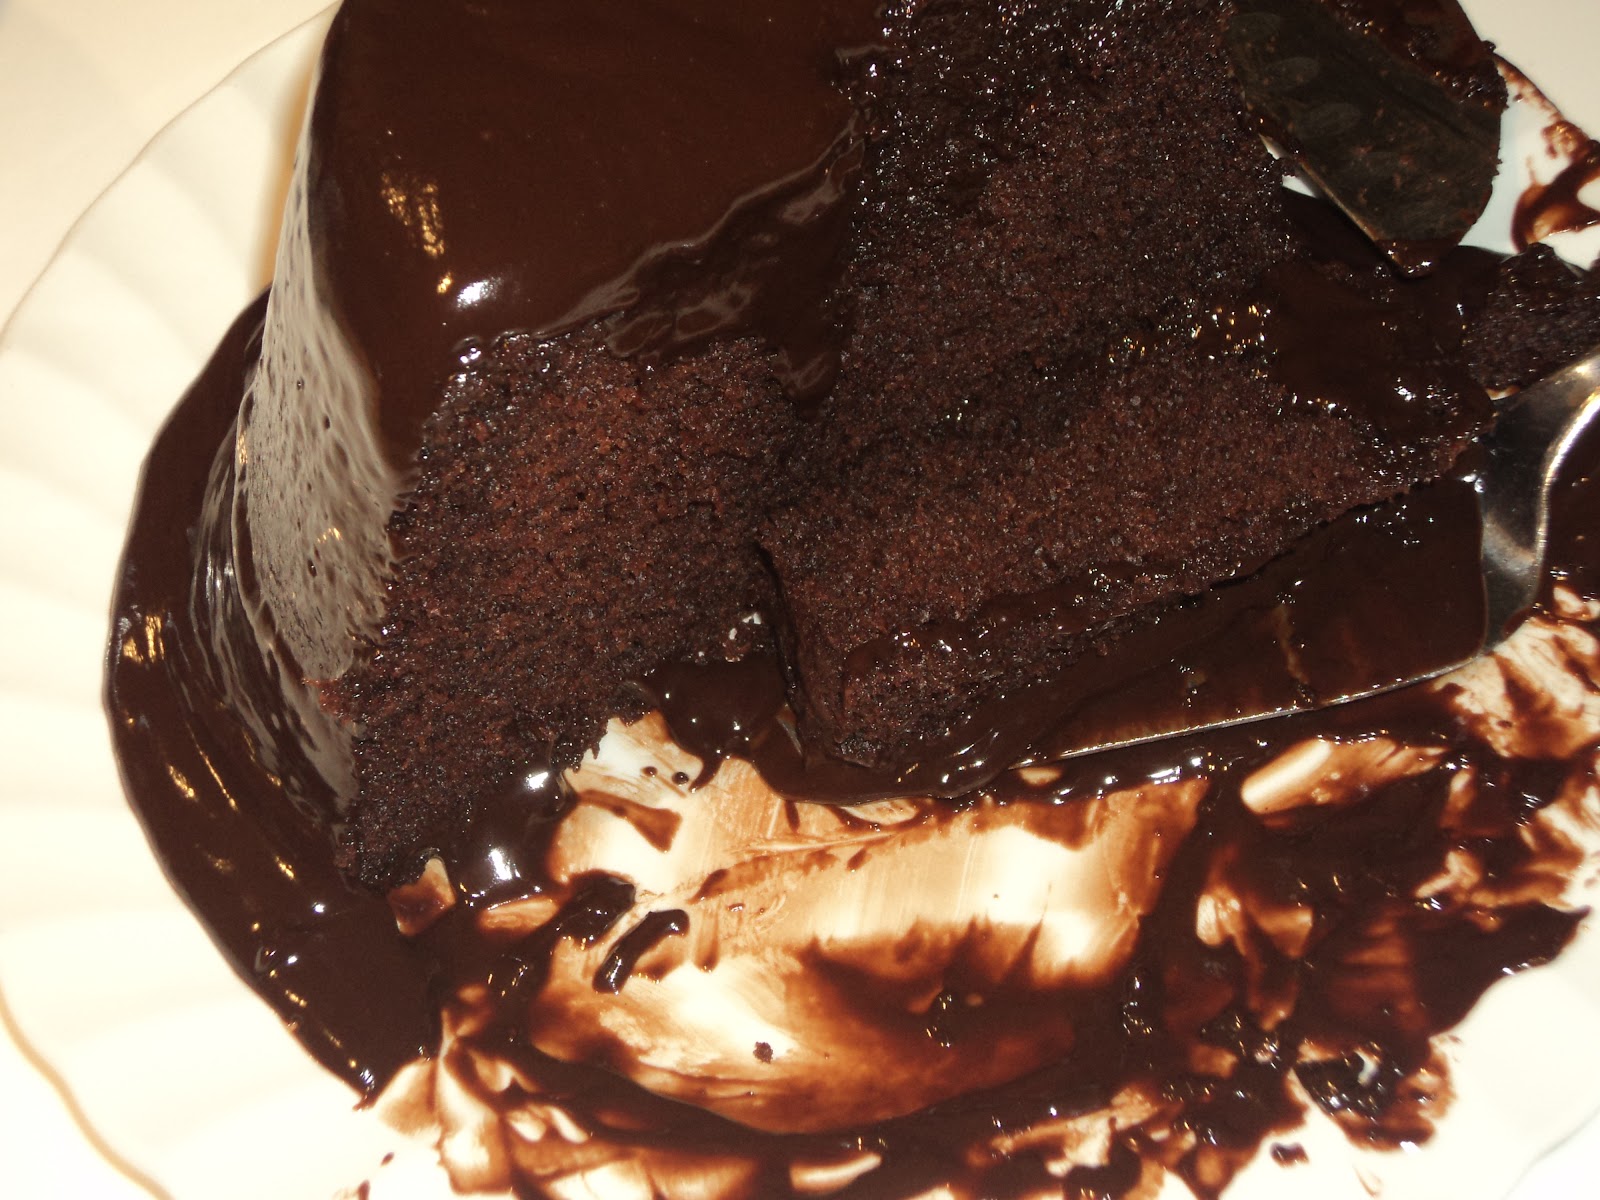 Princess of the kitchen: Death by Chocolate pudding